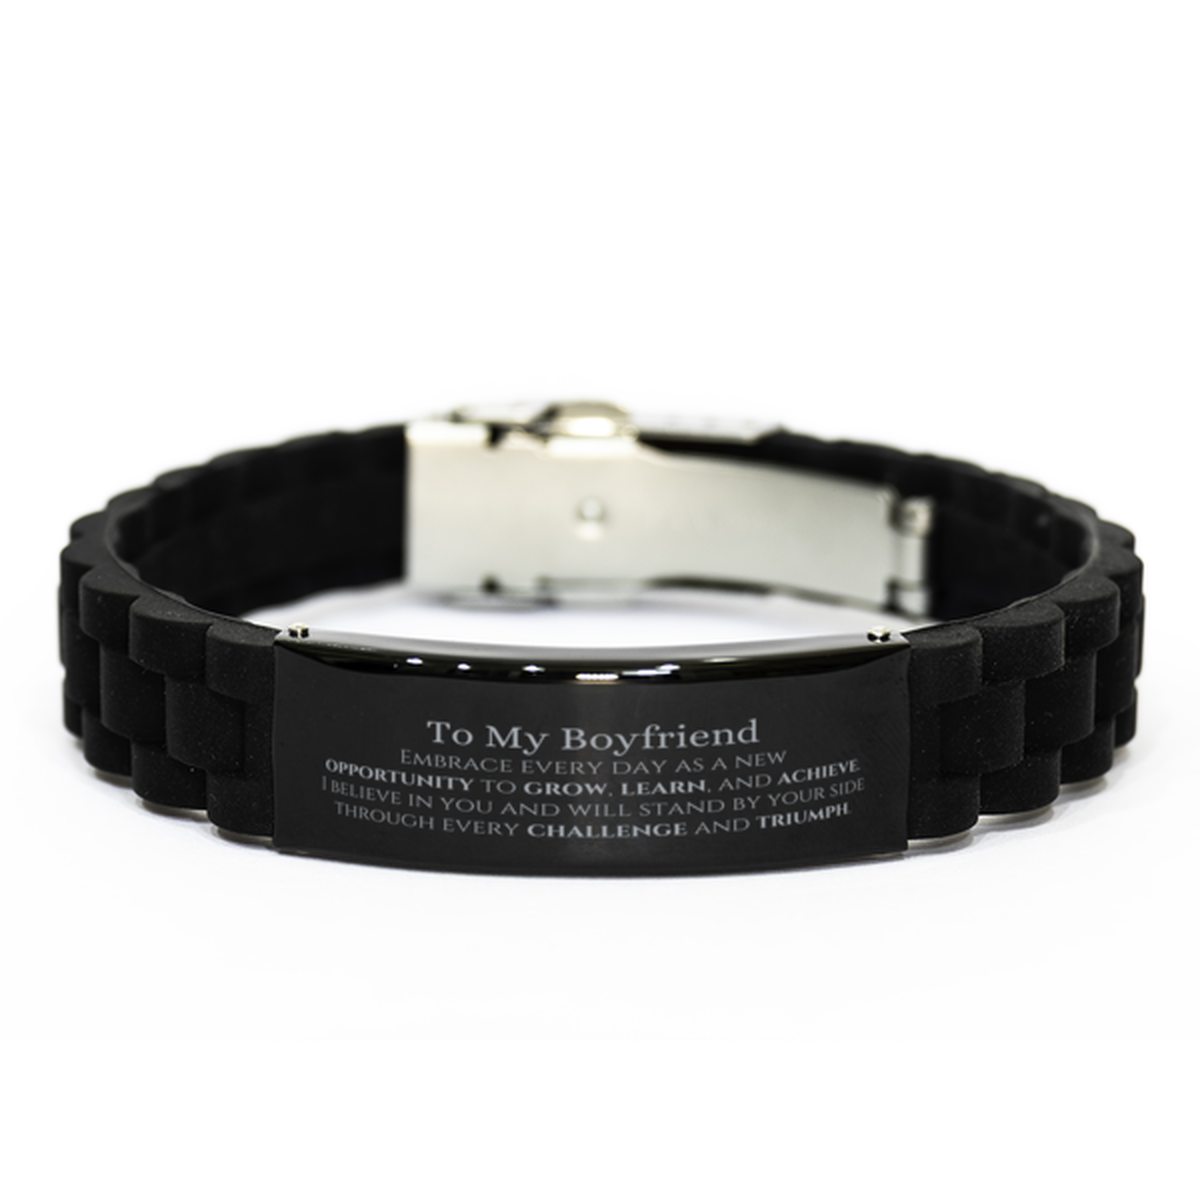 To My Boyfriend Gifts, I believe in you and will stand by your side, Inspirational Black Glidelock Clasp Bracelet For Boyfriend, Birthday Christmas Motivational Boyfriend Gifts